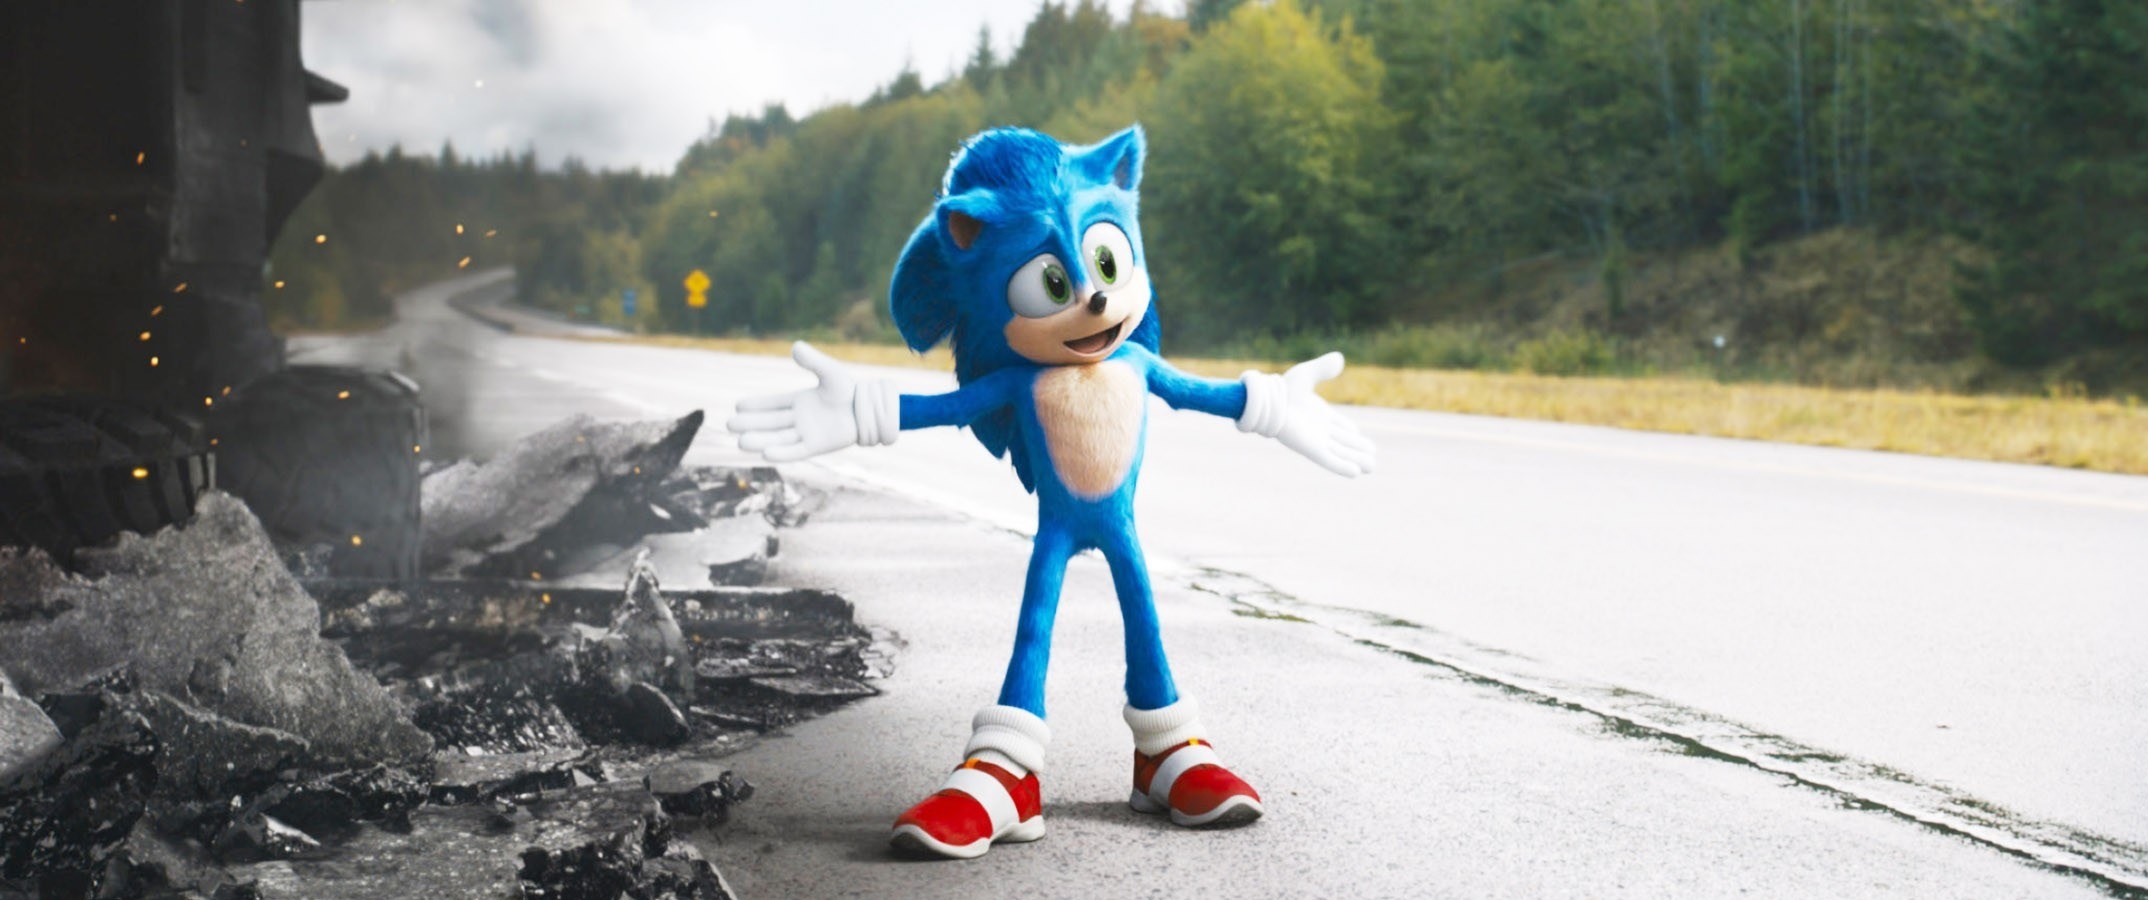 Sonic Hedgehog stands on the road